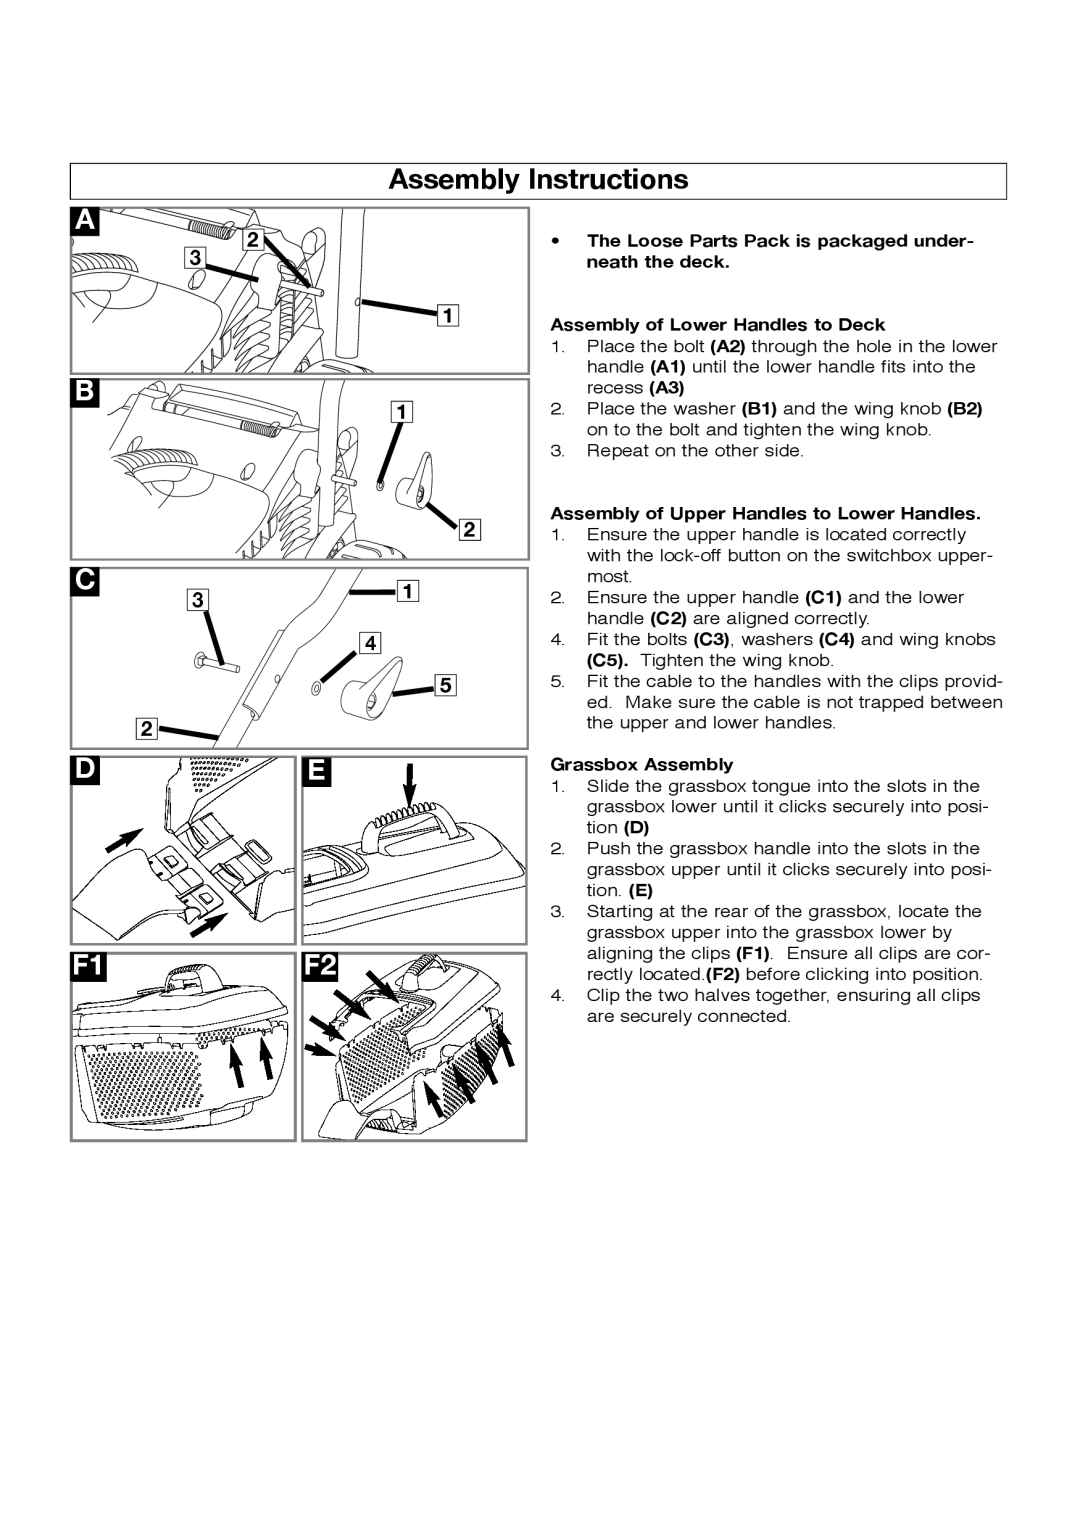 Flymo RM032, EM032 manual Assembly Instructions, The Loose Parts Pack is packaged under- neath the deck, Grassbox Assembly 